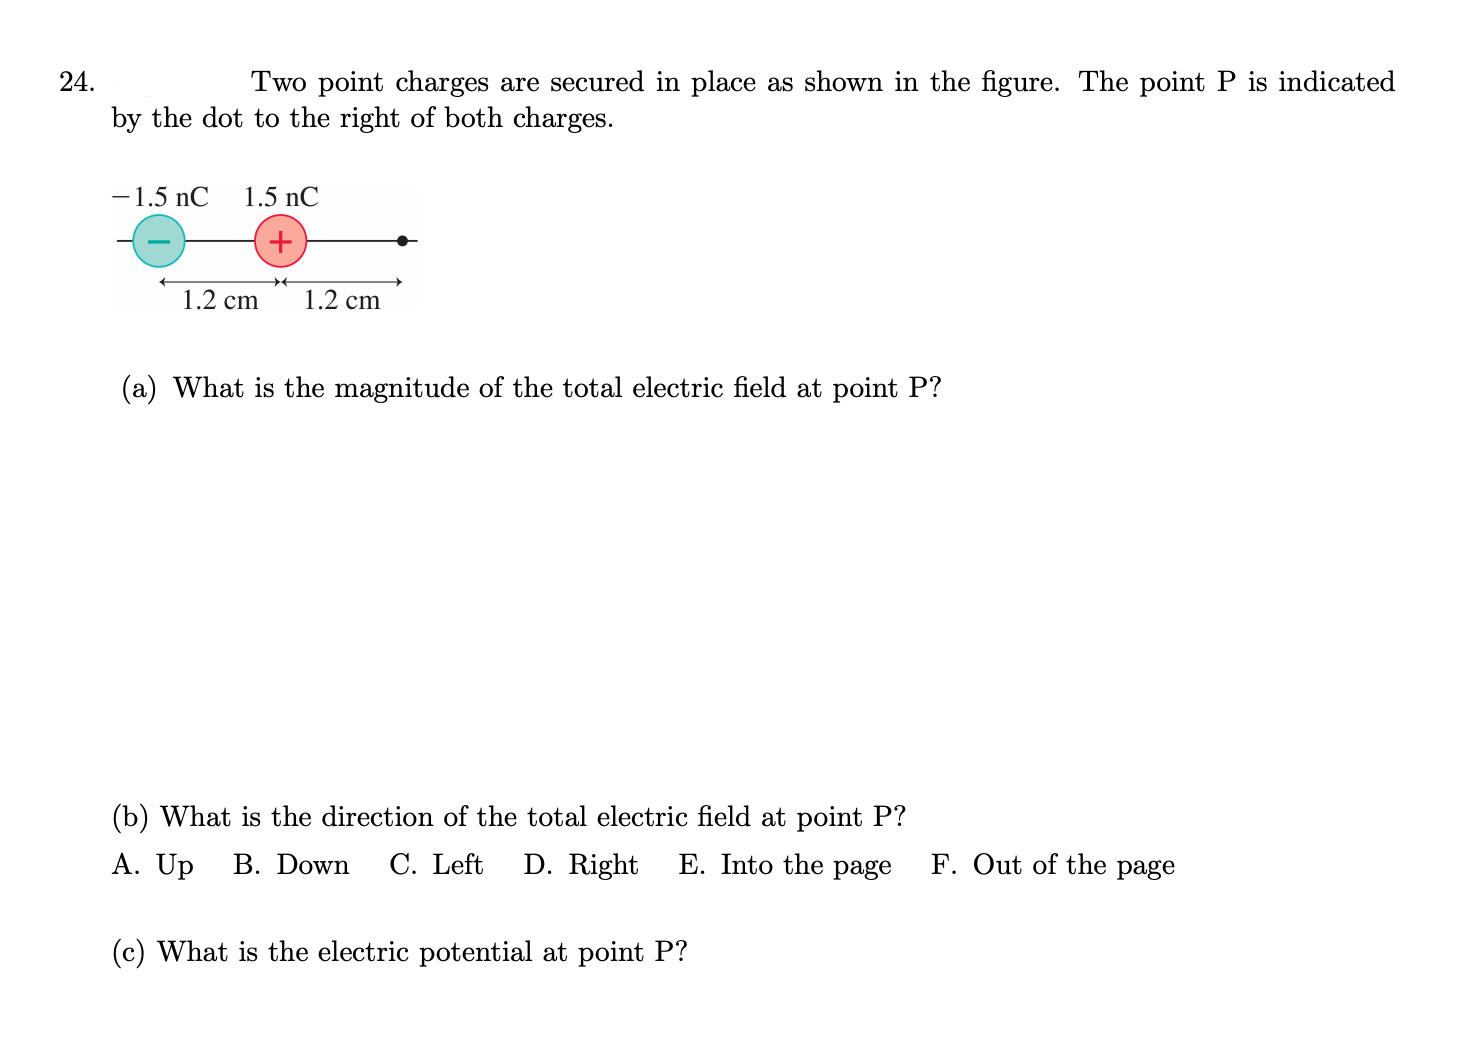 24.
Two point charges are secured in place as shown in the figure. The point P is indicated
by the dot to the right of both charges.
-1.5 nC
1.5 nC
1.2 cm
1.2 cm
(a) What is the magnitude of the total electric field at point P?
